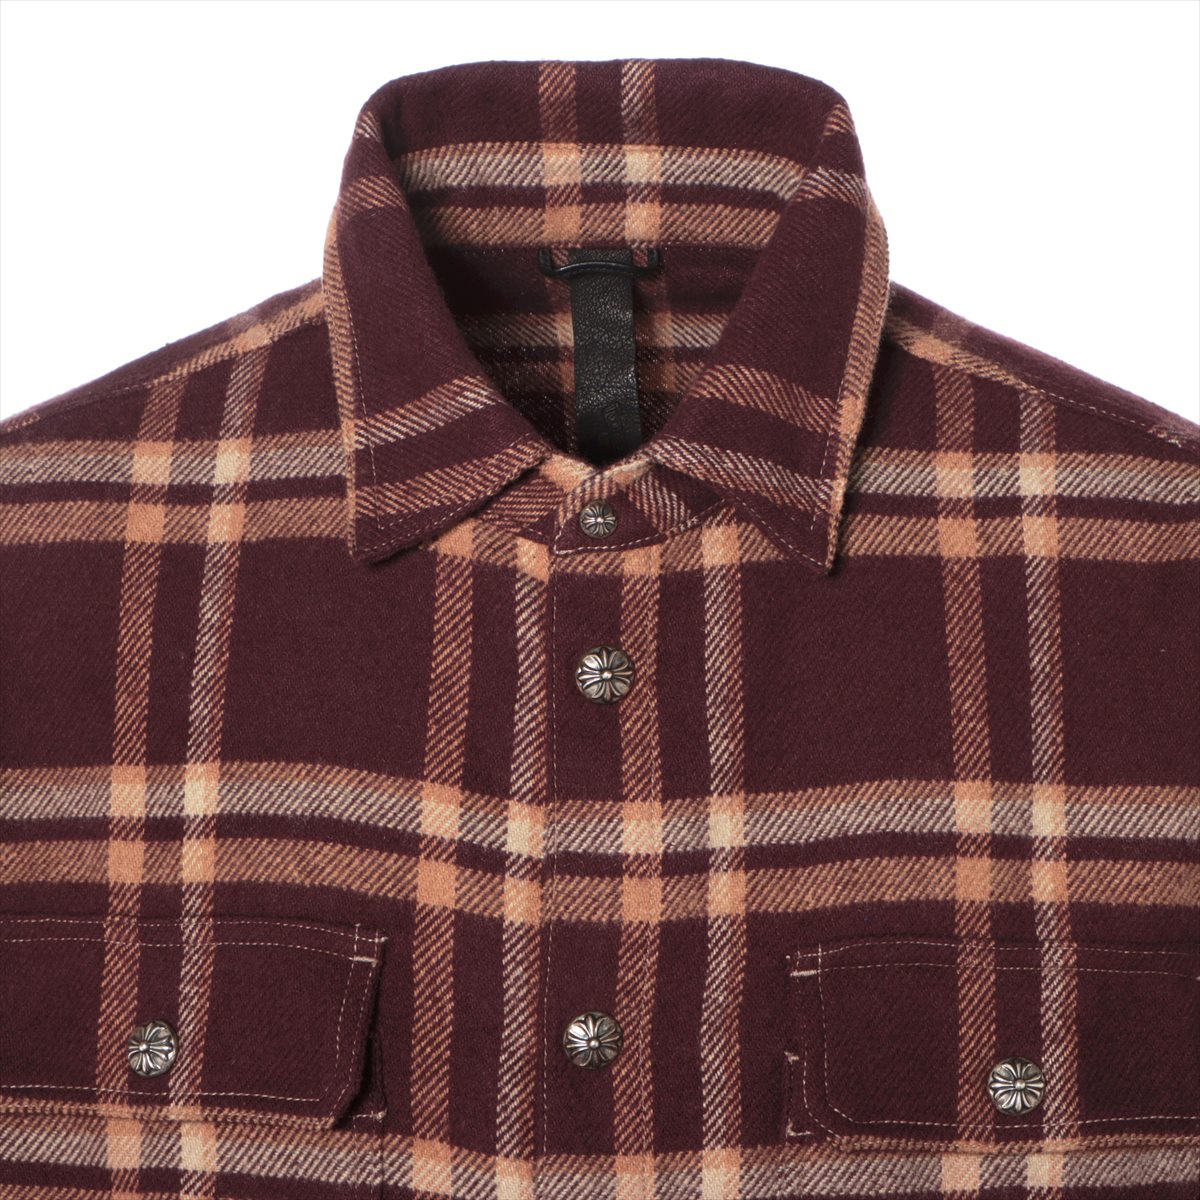 Chrome Hearts Checked shirt Cotton & polyester size XL Brown Work dog